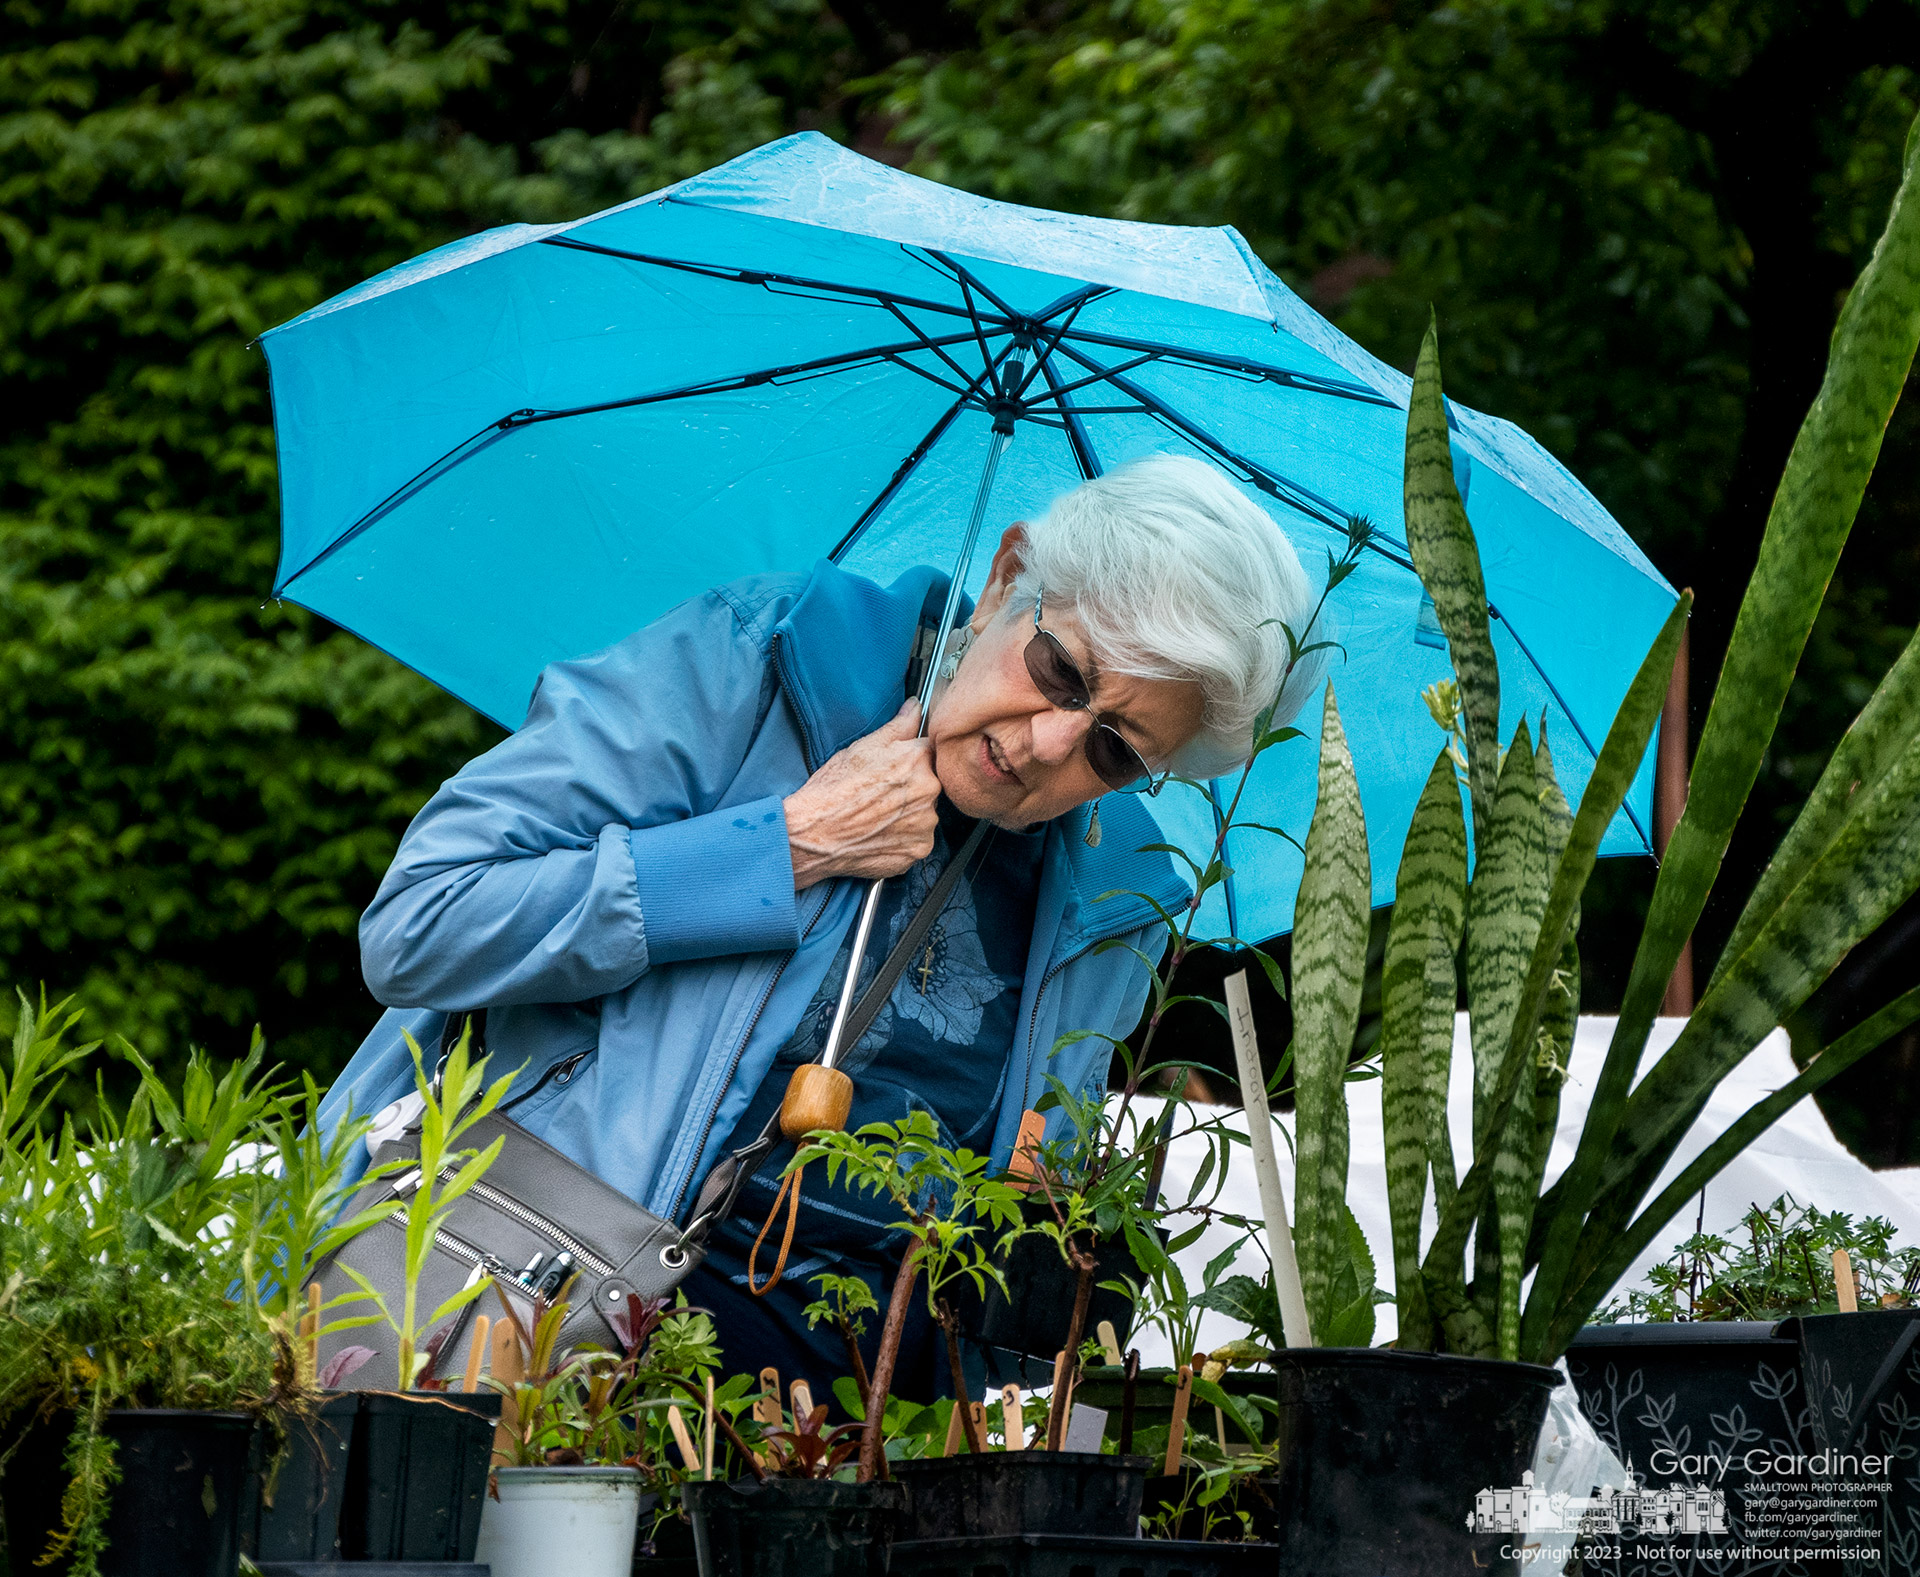 A woman carrying a blue umbrella to keep her dry for morning rain leans into inspecting her options at the Westerville Garden Club's Annual Plant Sale in Uptown. My final Photo for May 13, 2023.